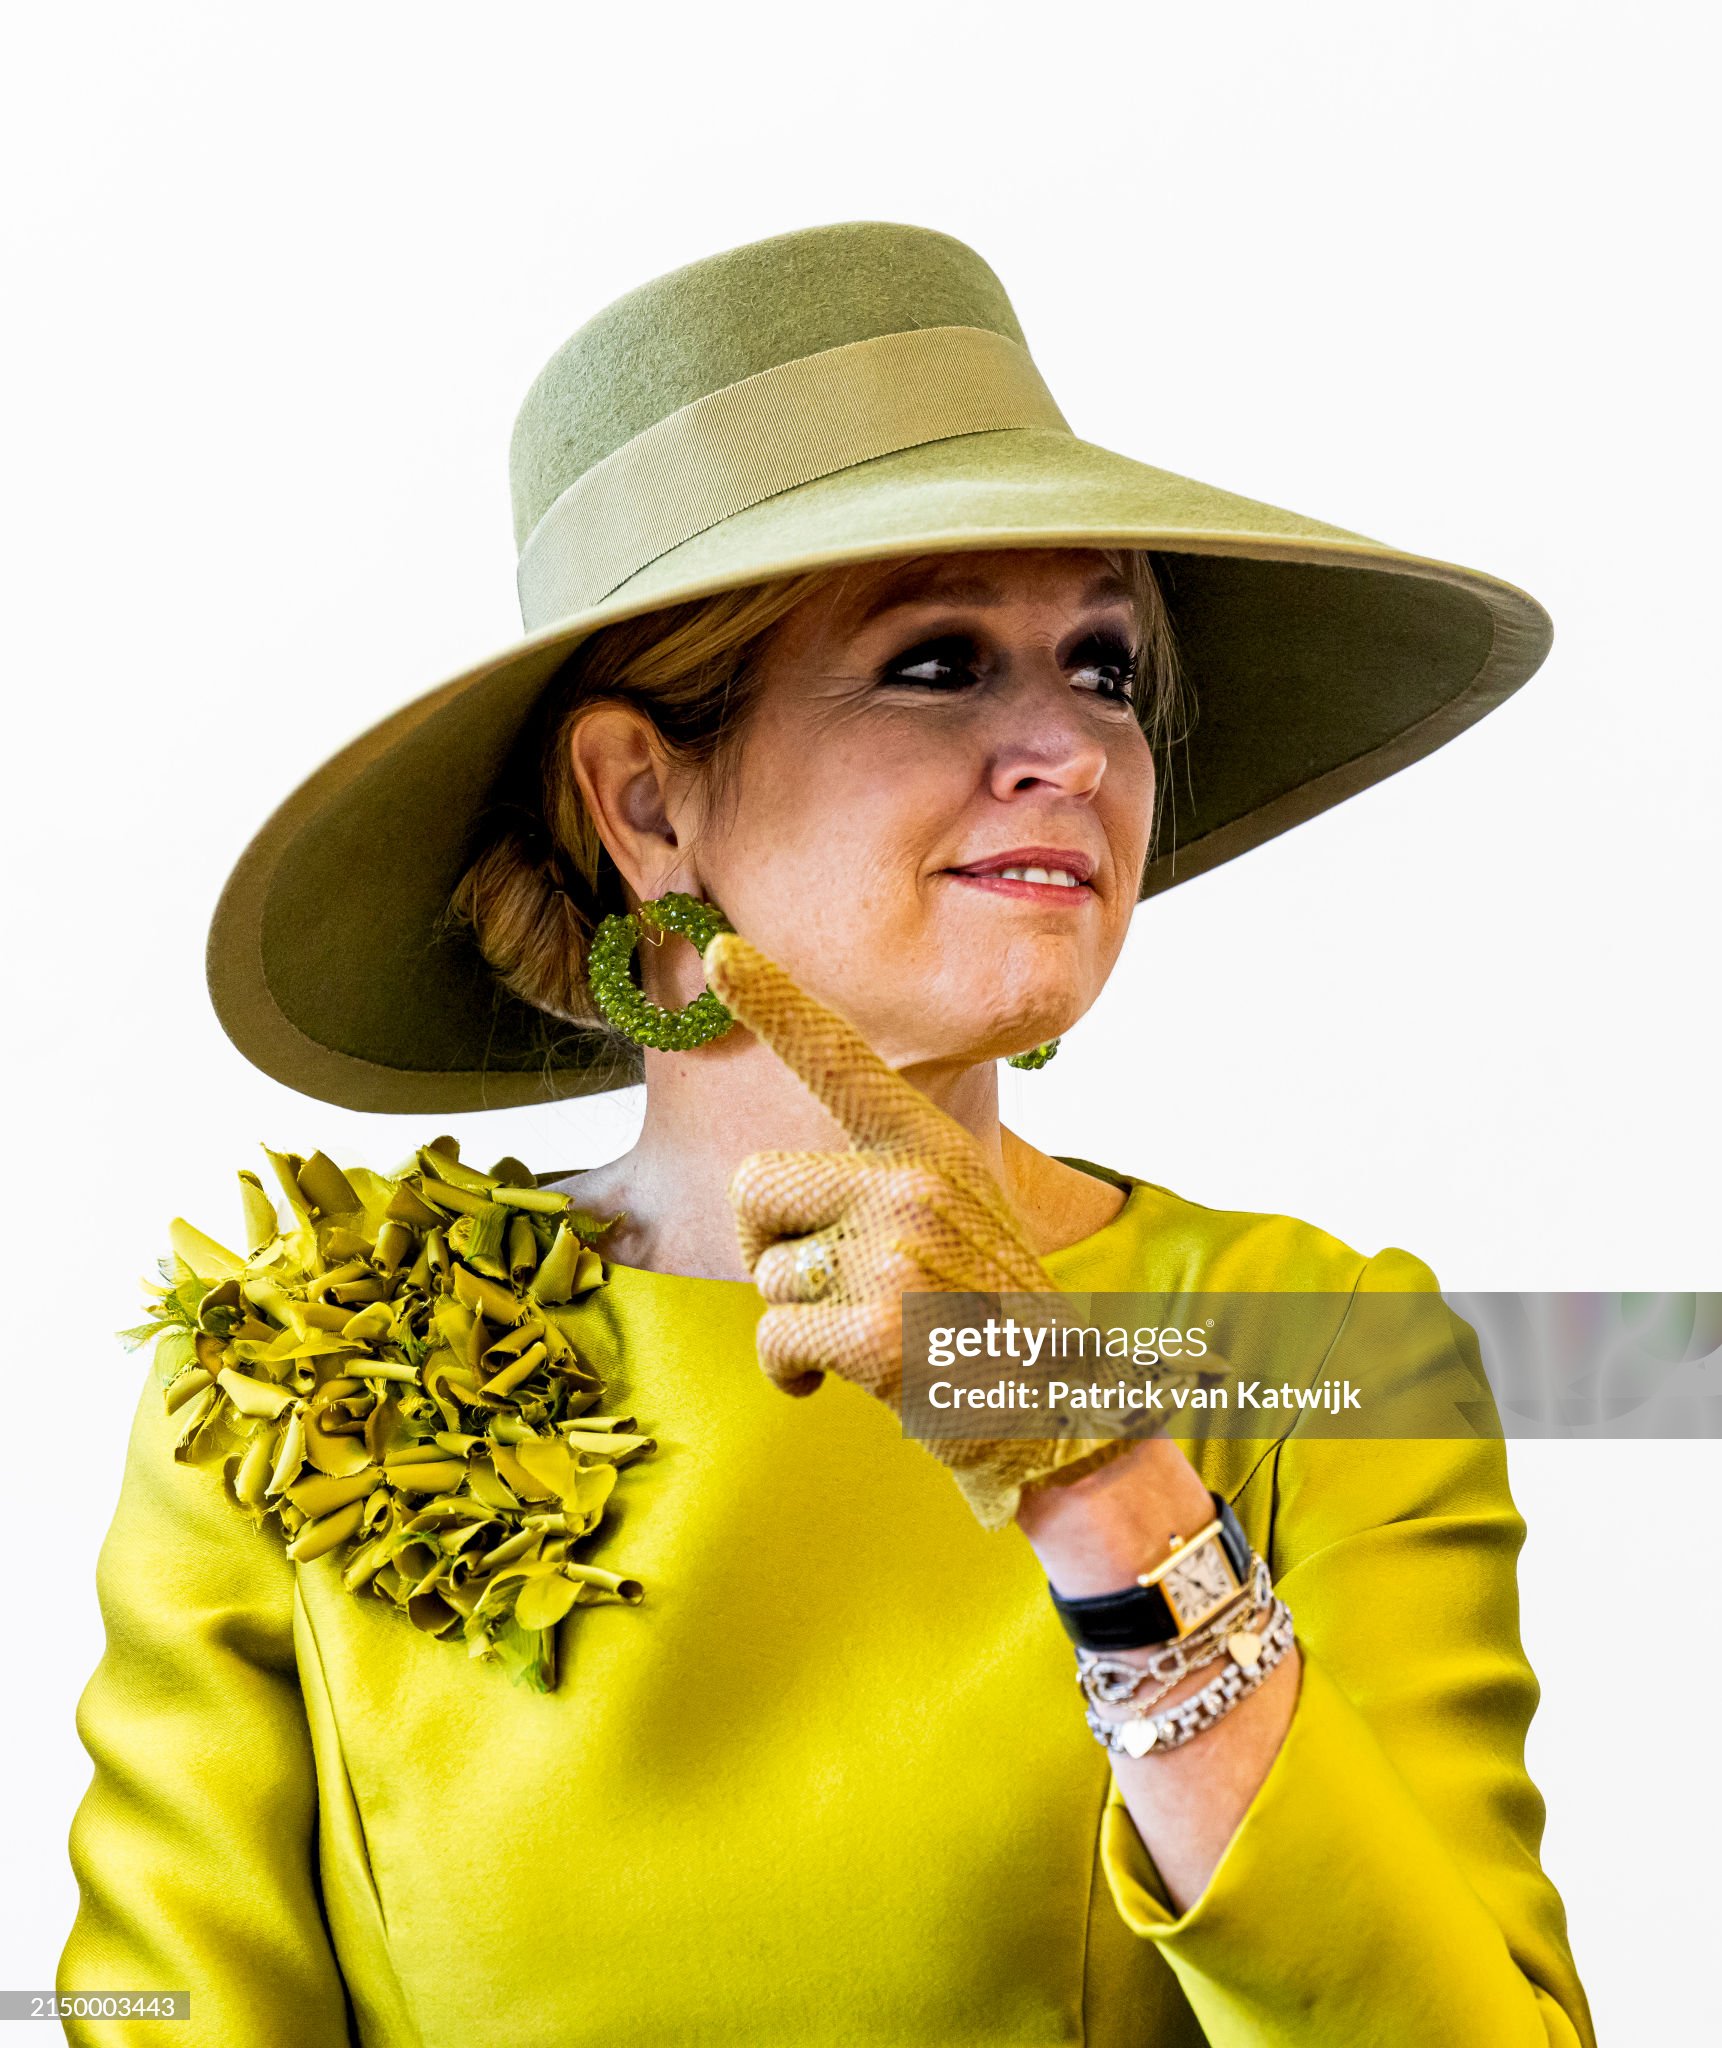 queen-maxima-of-the-netherlands-attends-the-10th-anniversary-language-in-the-hague.jpg?s=2048x2048&w=gi&k=20&c=OIS5m4Cs-9RAfKGN3PDrB164-OR-Q6lCJcCPE6hhfes=